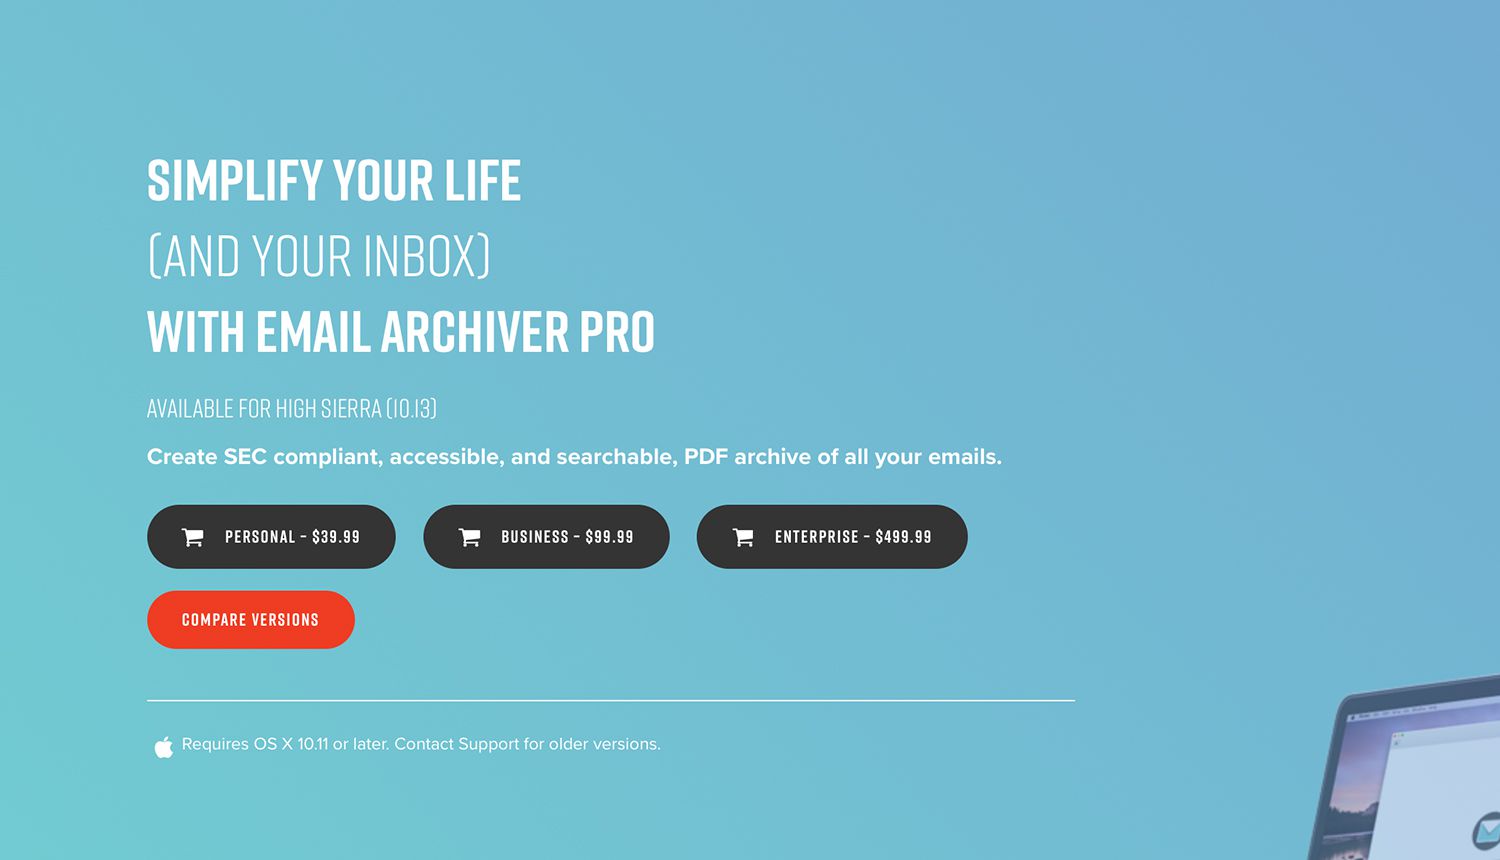 Email Archiver Pro pro MacOS Mail